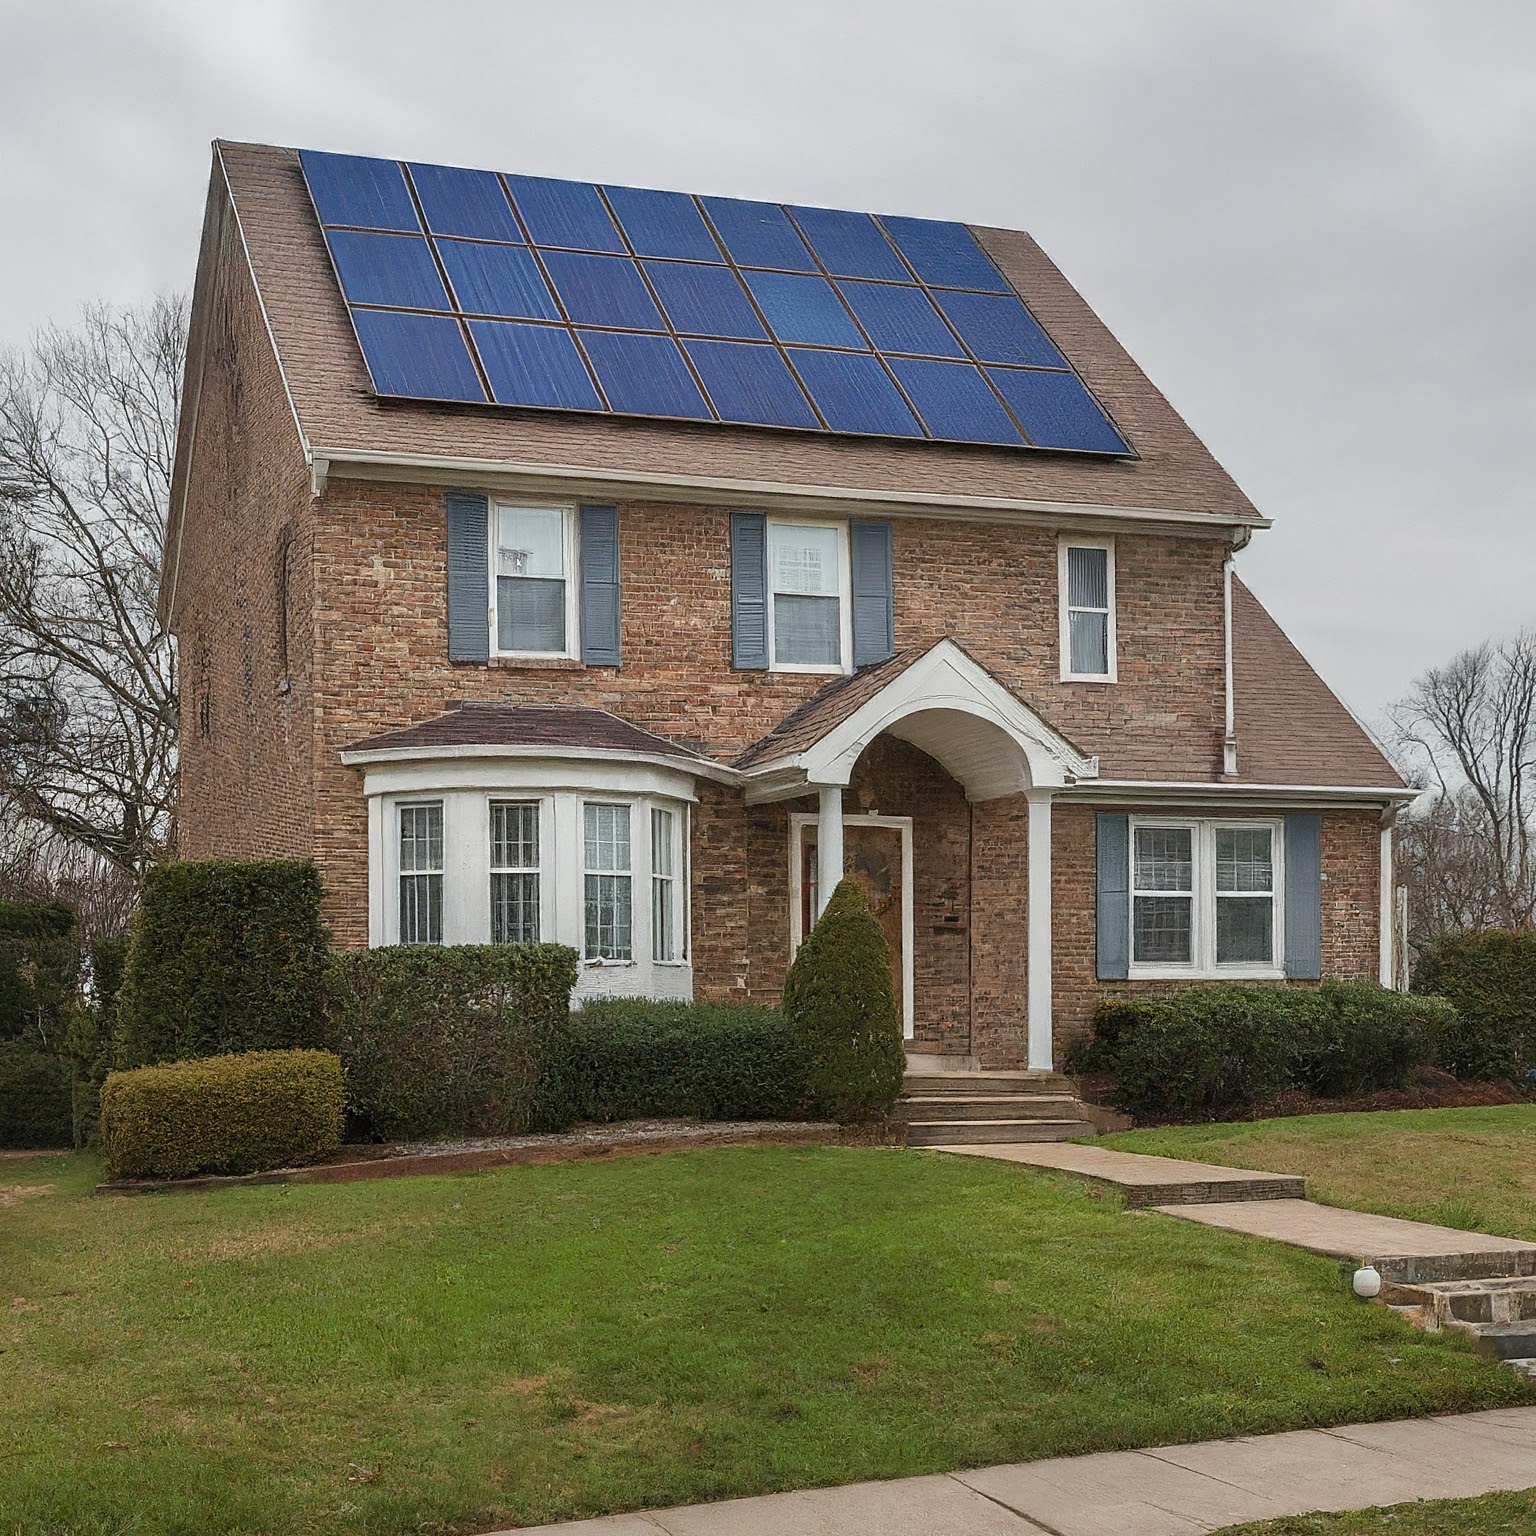 Lakewood home with solar panels